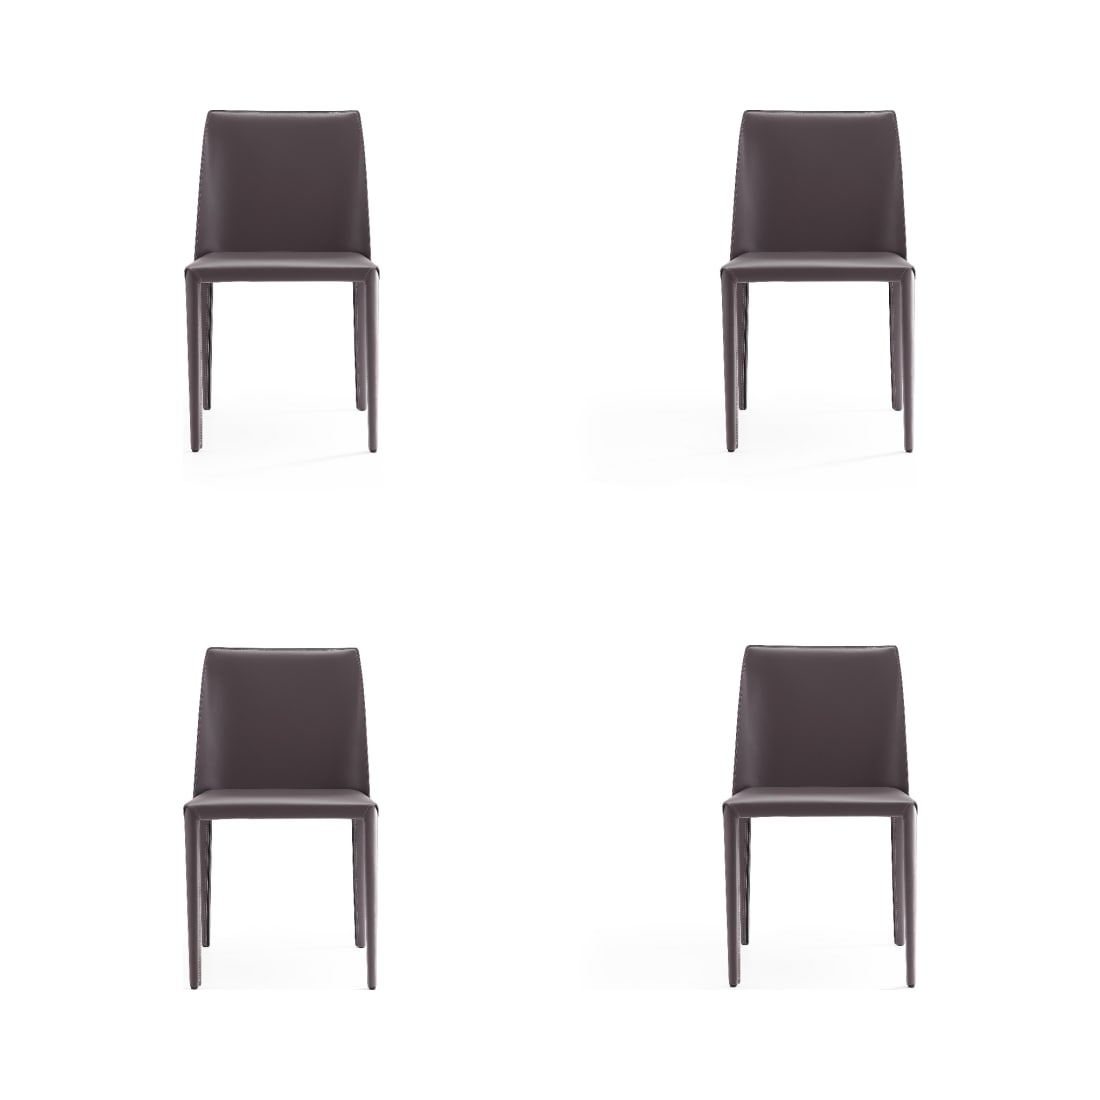 Paris Dining Chair in Gray (Set of 4)